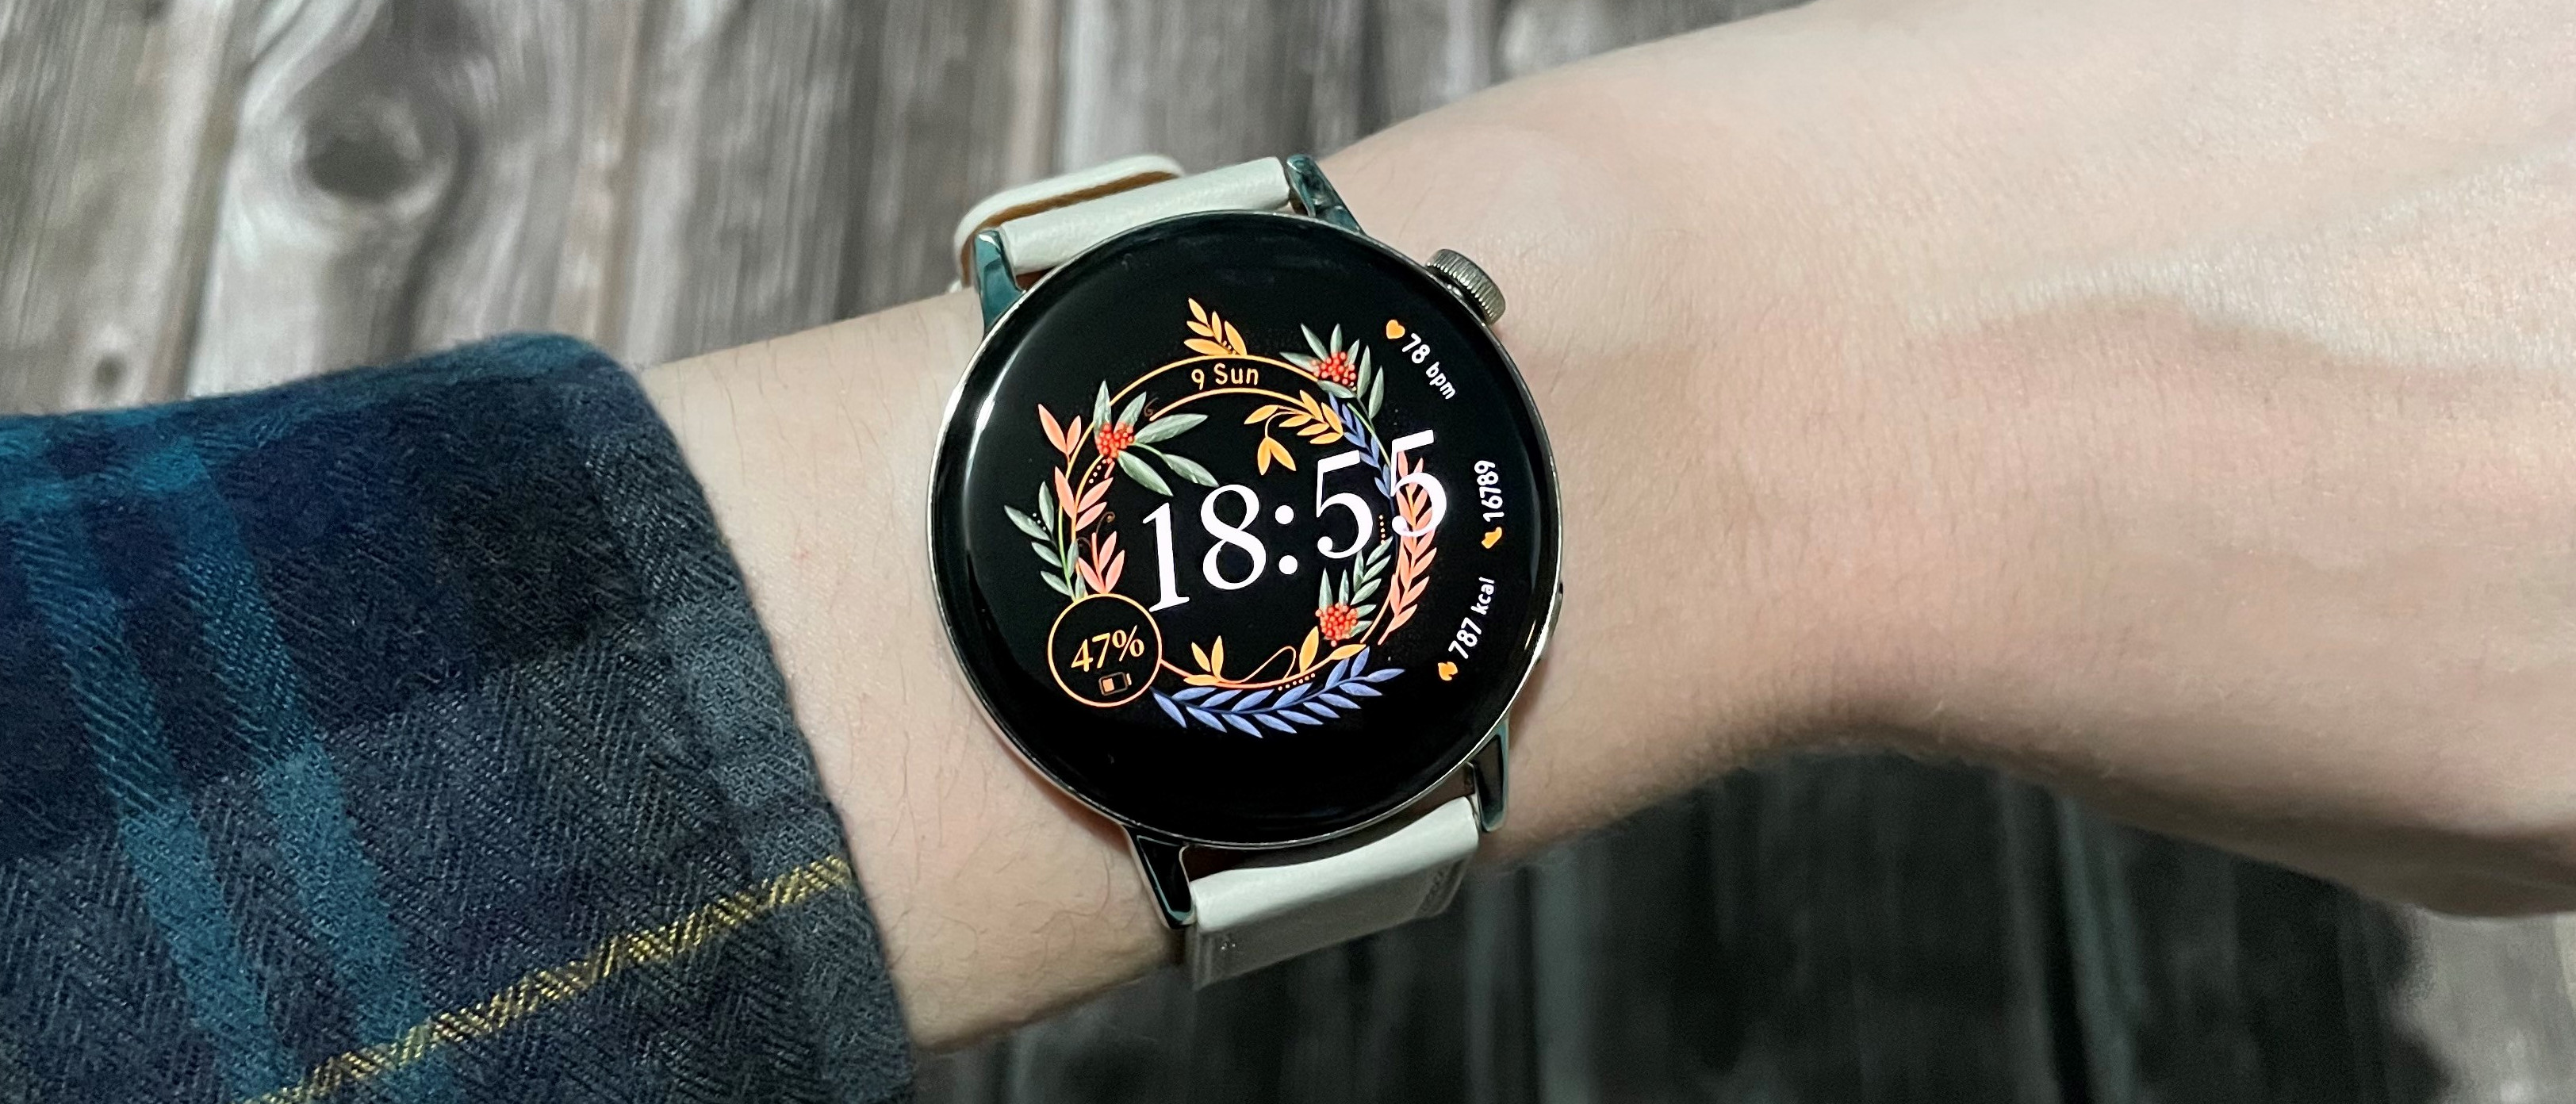 Honor Watch 4 global comes without eSIM and only supports Bluetooth calling  - Huawei Central